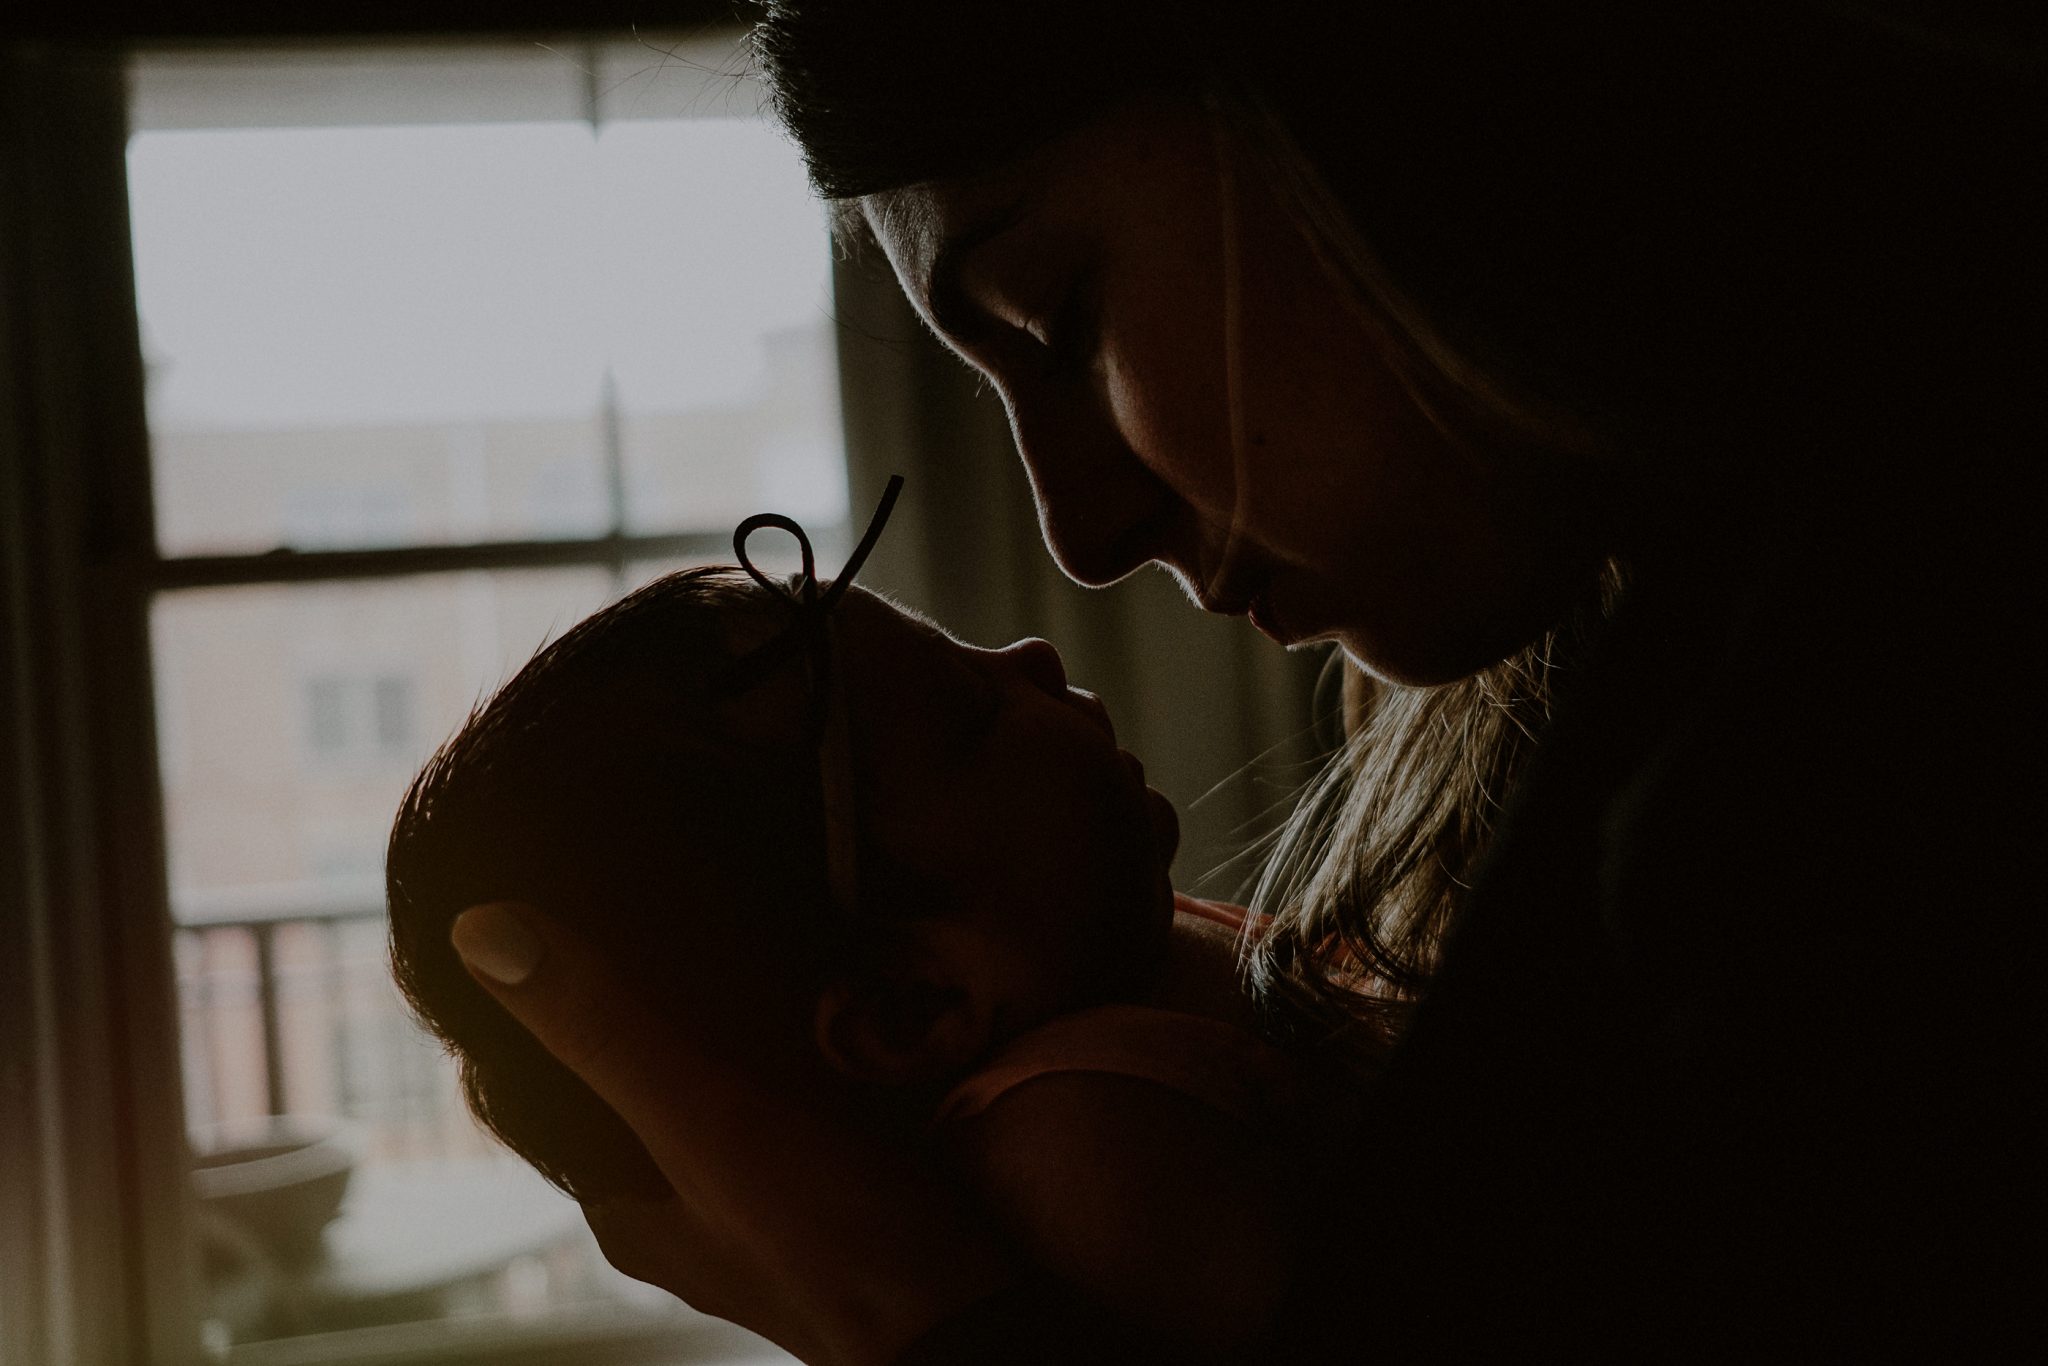 silhouette of mother's face holding baby's face by window